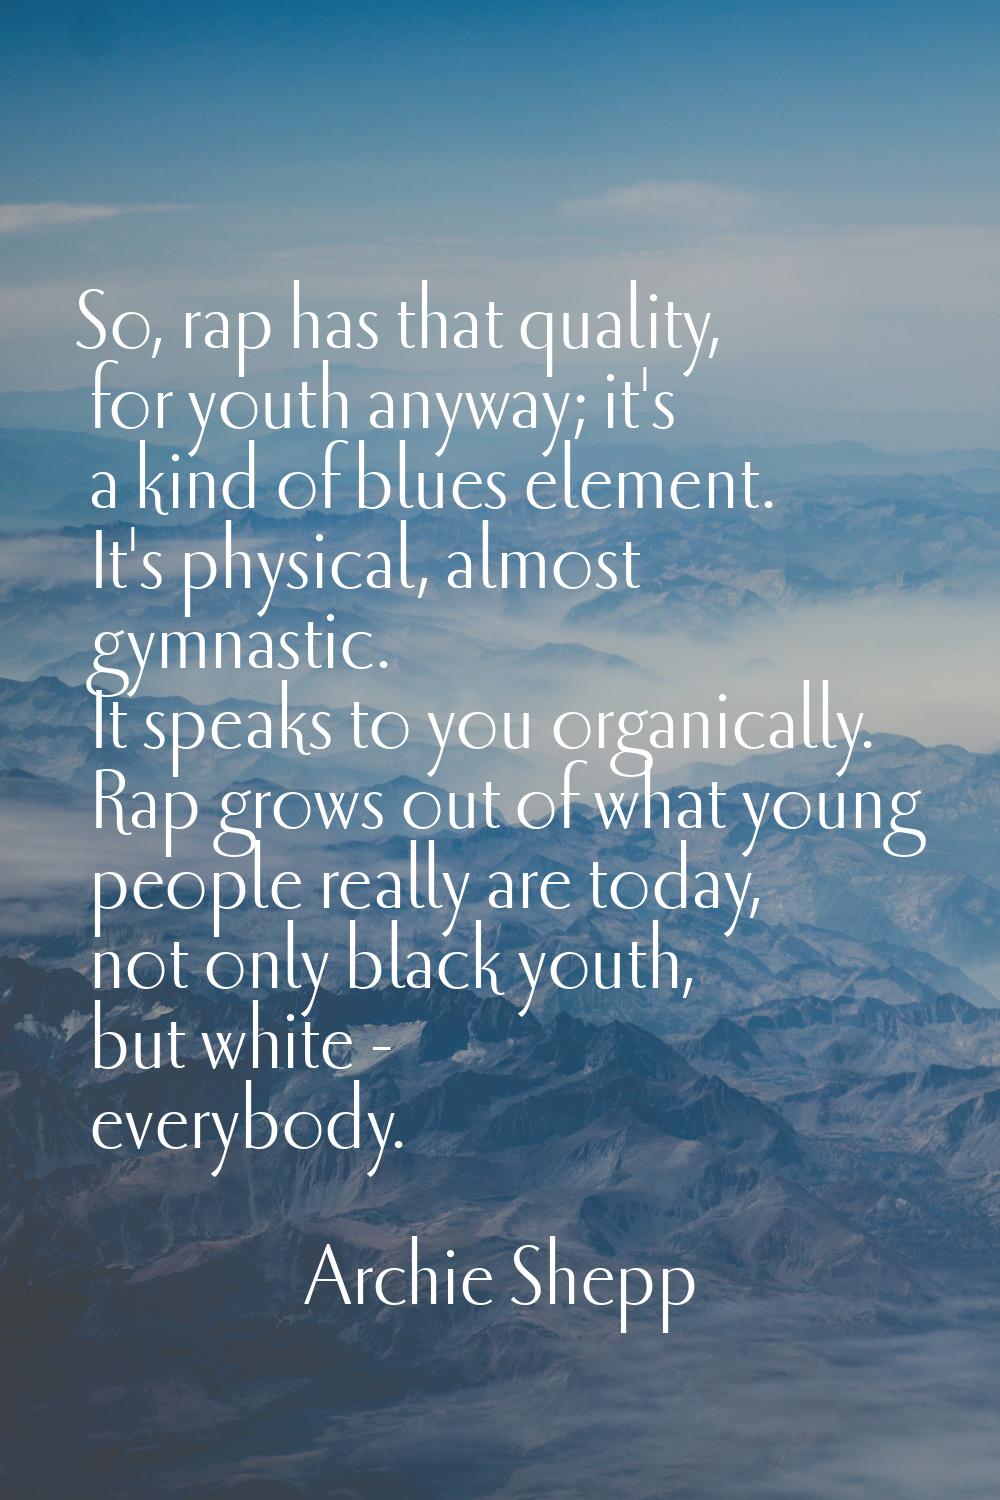 So, rap has that quality, for youth anyway; it's a kind of blues element. It's physical, almost gym